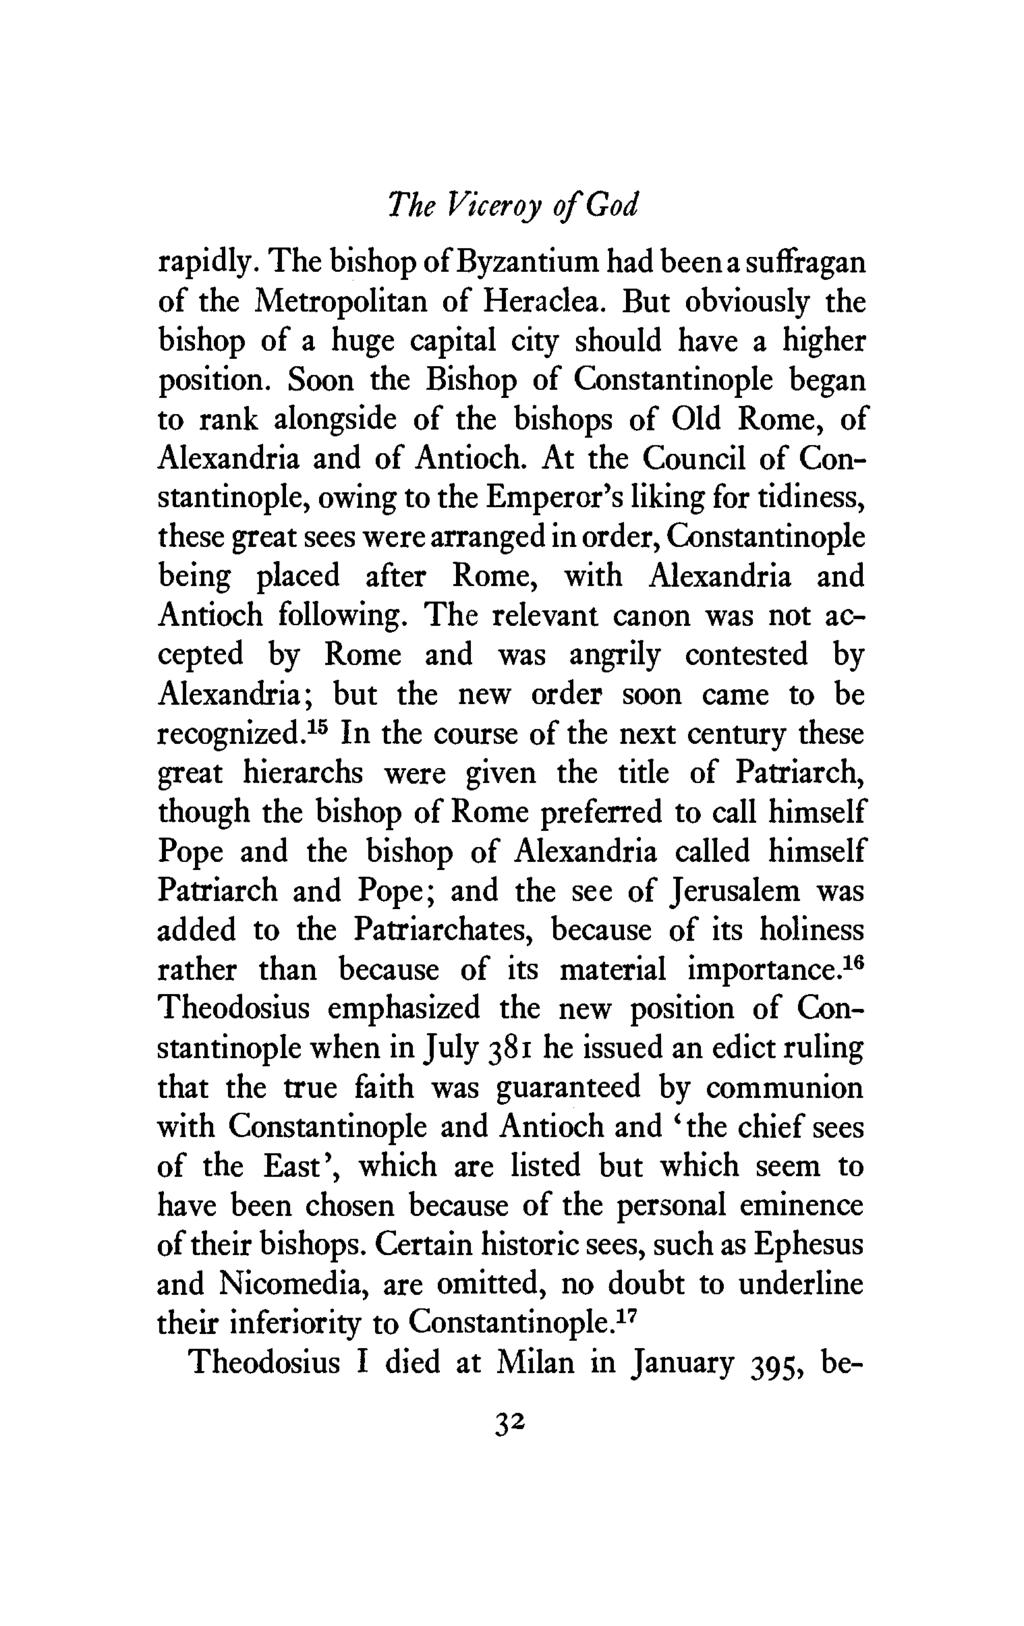 The Viceroy of God rapidly. The bishop of Byzantium had been a suffragan of the Metropolitan of Heraclea. But obviously the bishop of a huge capital city should have a higher position.